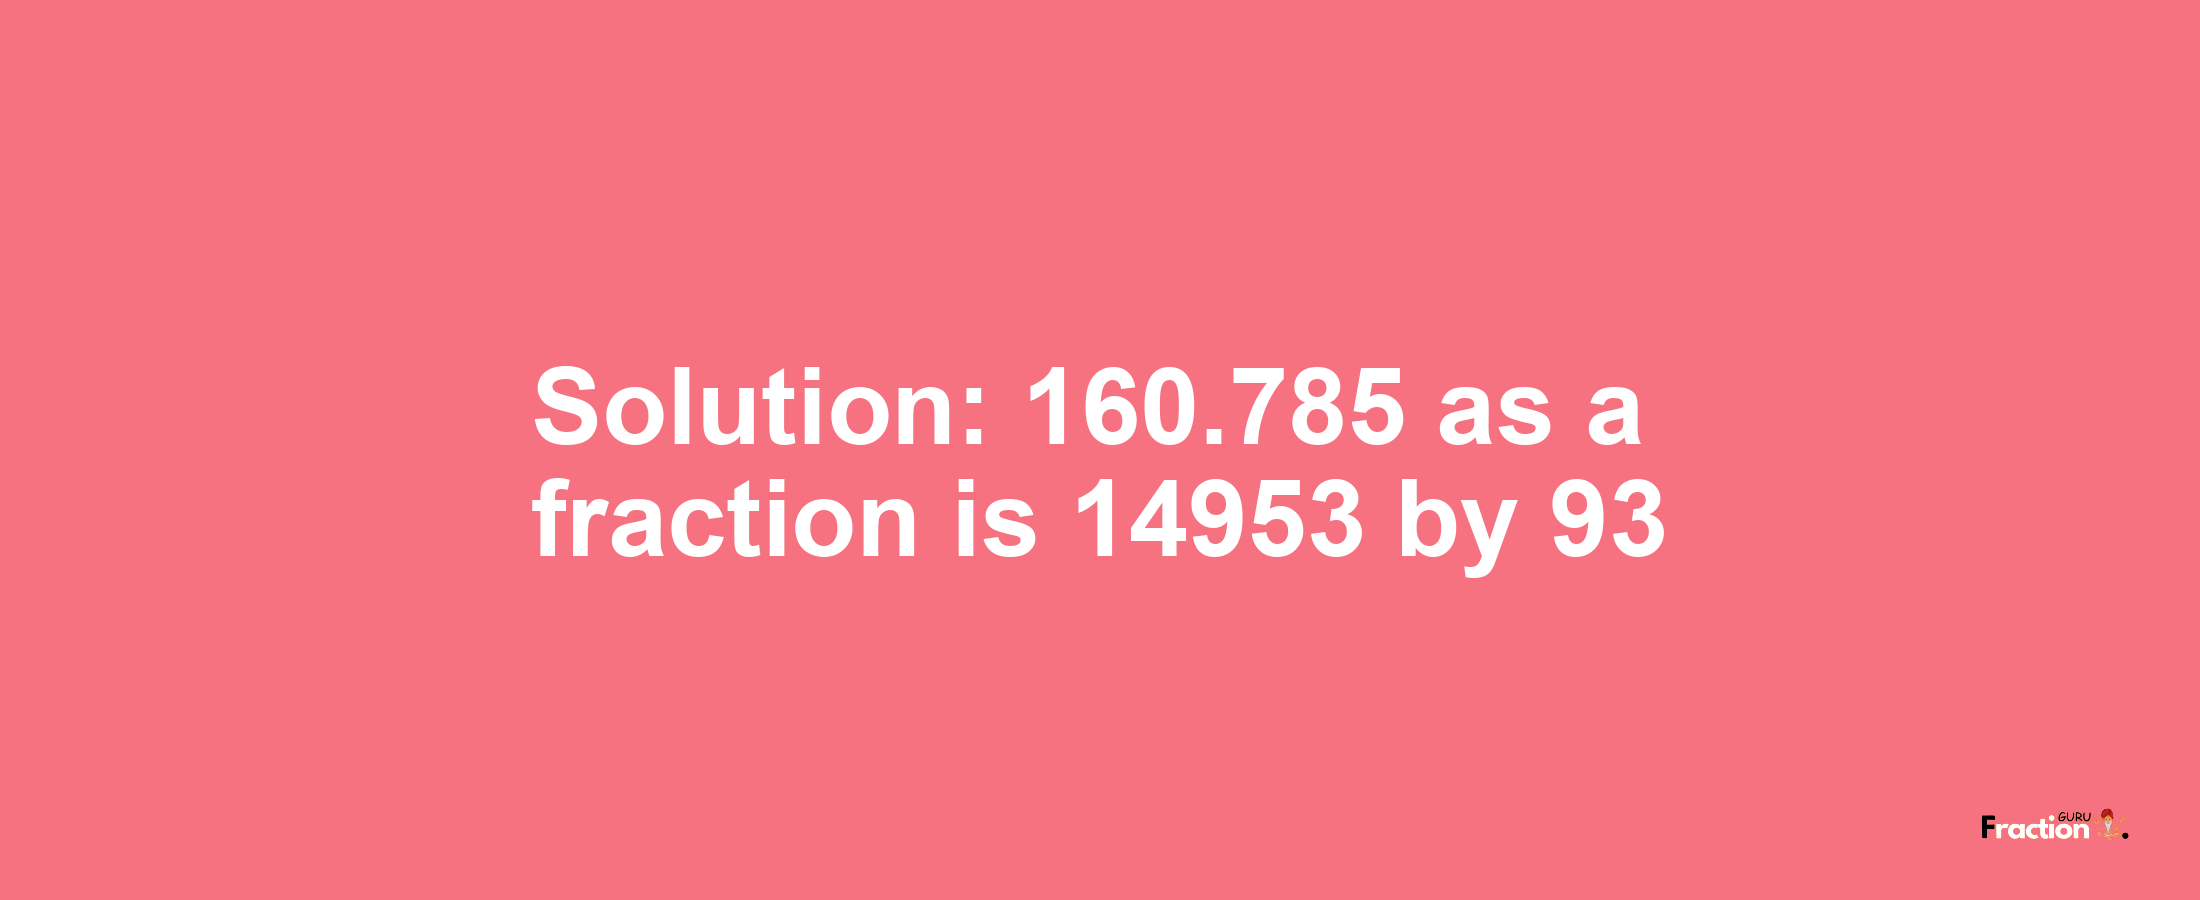 Solution:160.785 as a fraction is 14953/93